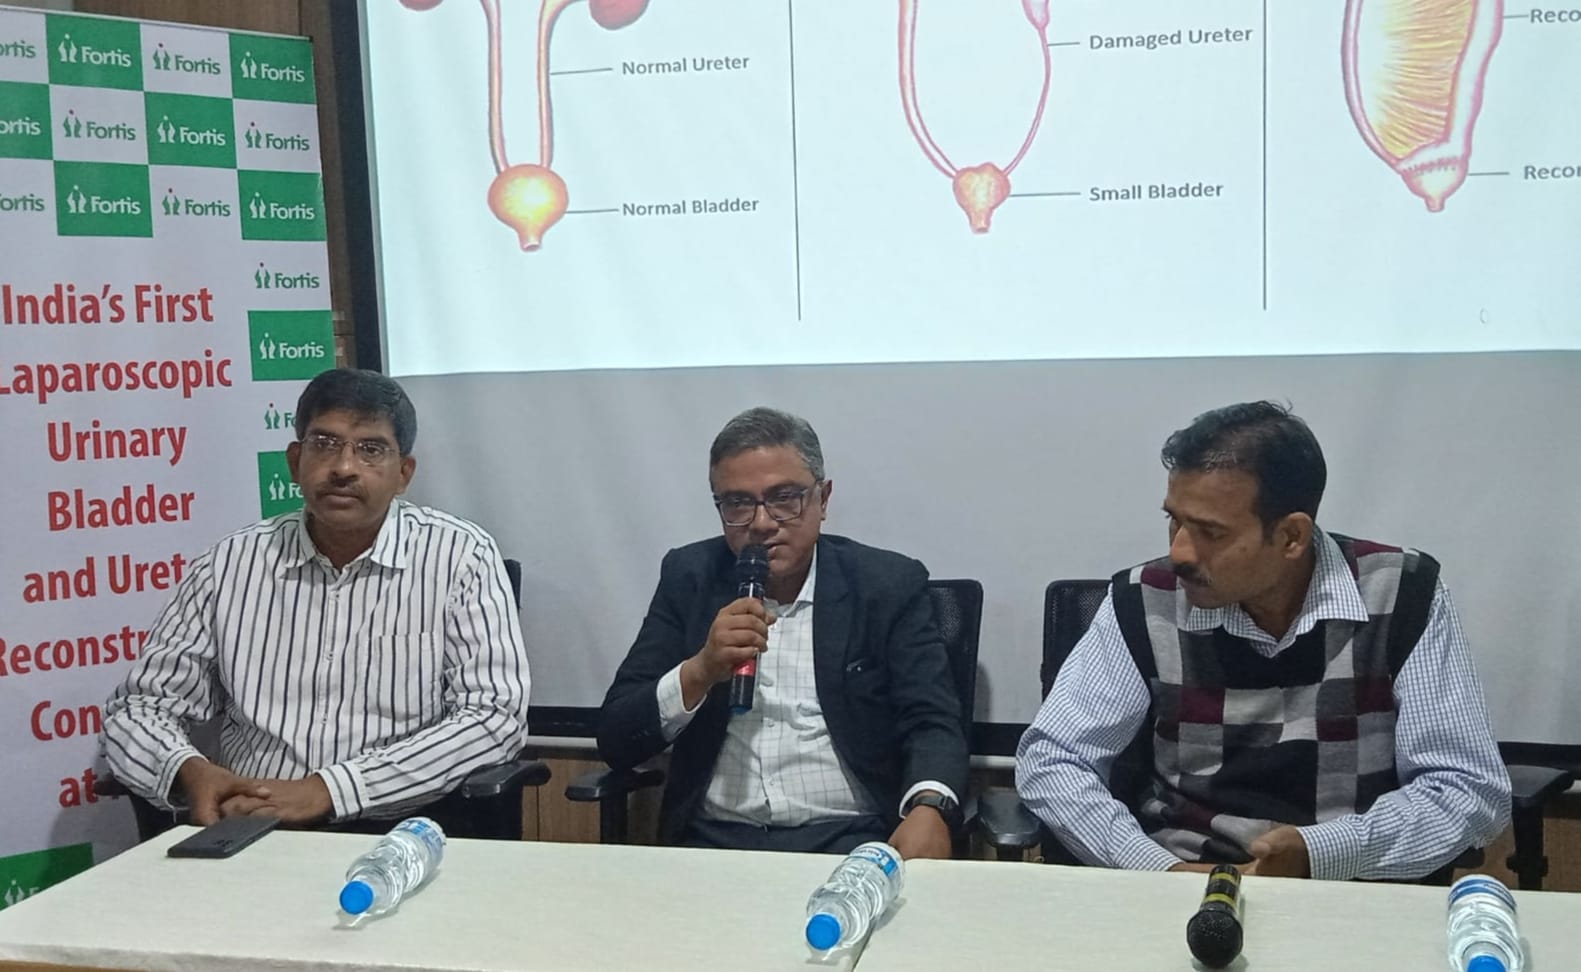 India’s 1st Laparoscopic Urinary bladder and Ureter reconstruction conducted at Fortis Hospital, Kolkata